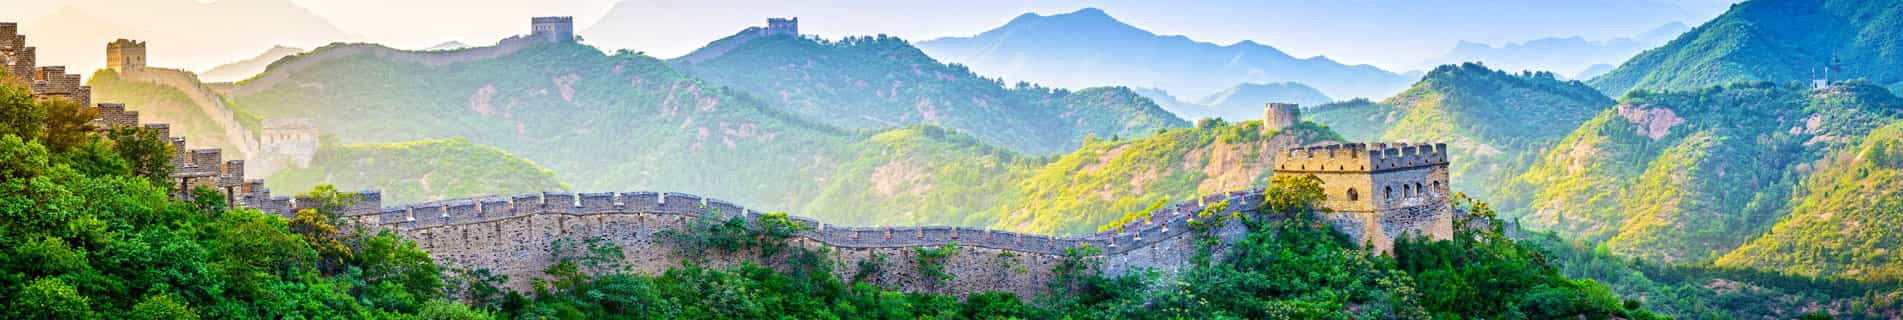 tourist attractions in the great wall of china